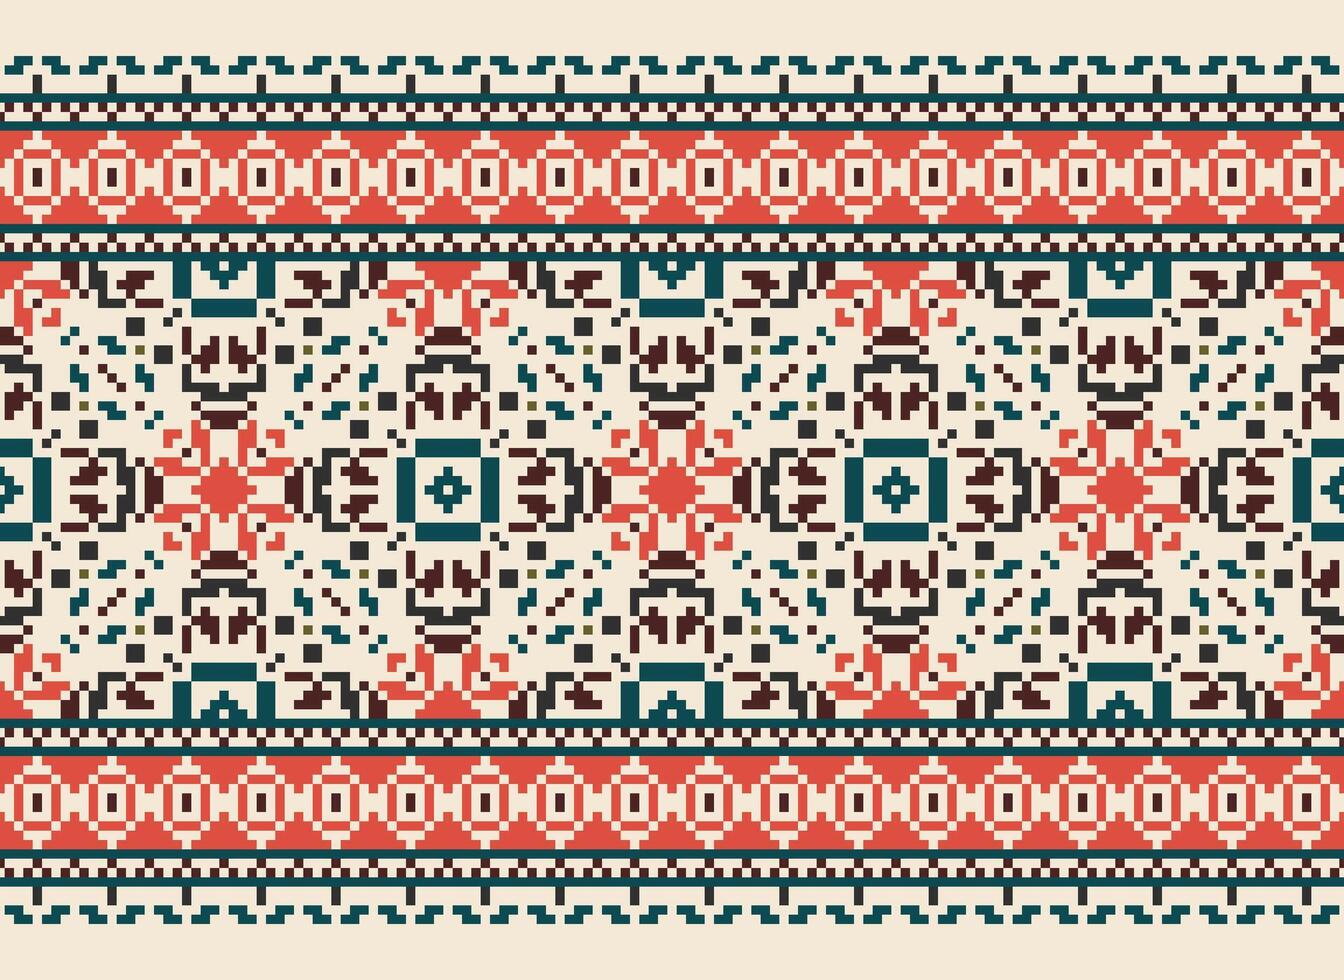 Beautiful pixel patterns traditional folk style, geometric ethnic seamless pattern vector illustration. Design for  cross stitch, carpet, wallpaper, clothing, texti fabric, wrapping, batik, embroidery